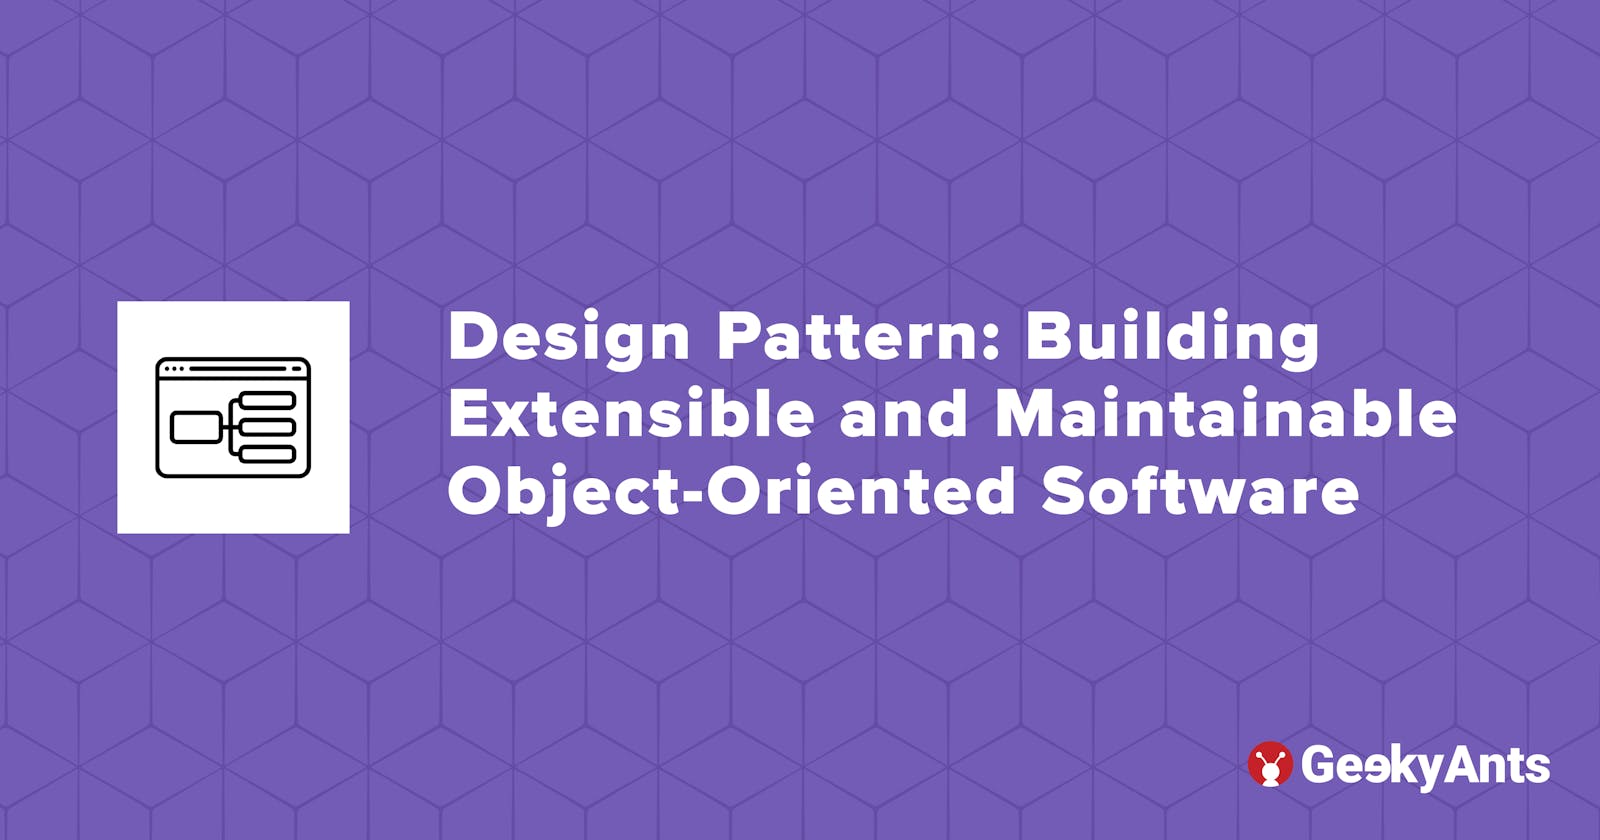 Design Pattern: Building Extensible and Maintainable Object-Oriented Software